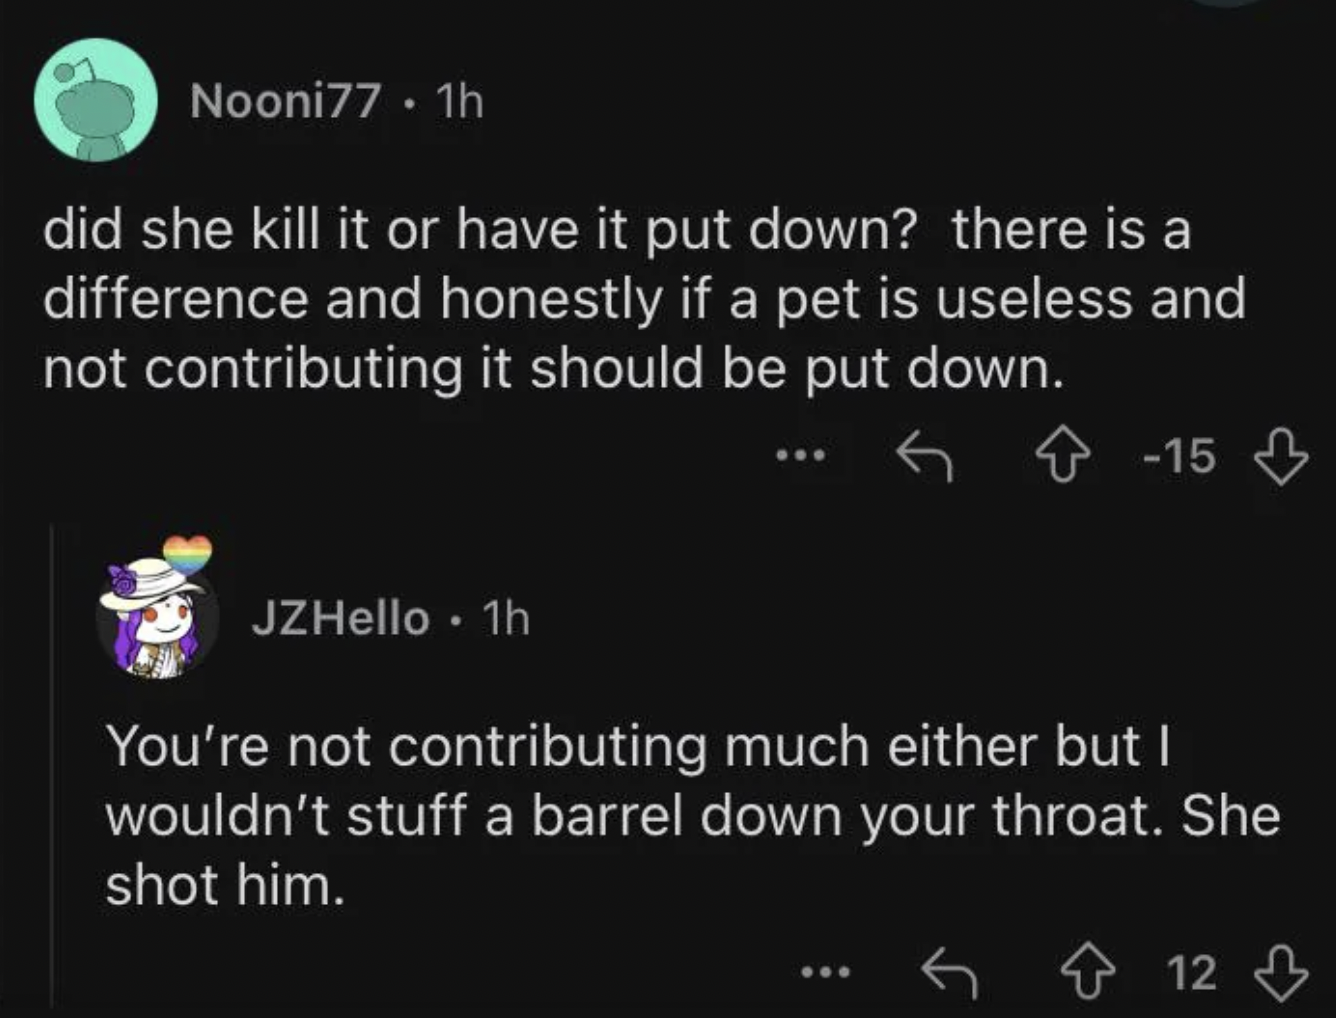 screenshot - Nooni77 1h did she kill it or have it put down? there is a difference and honestly if a pet is useless and not contributing it should be put down. 15 JZHello 1h You're not contributing much either but I wouldn't stuff a barrel down your throa